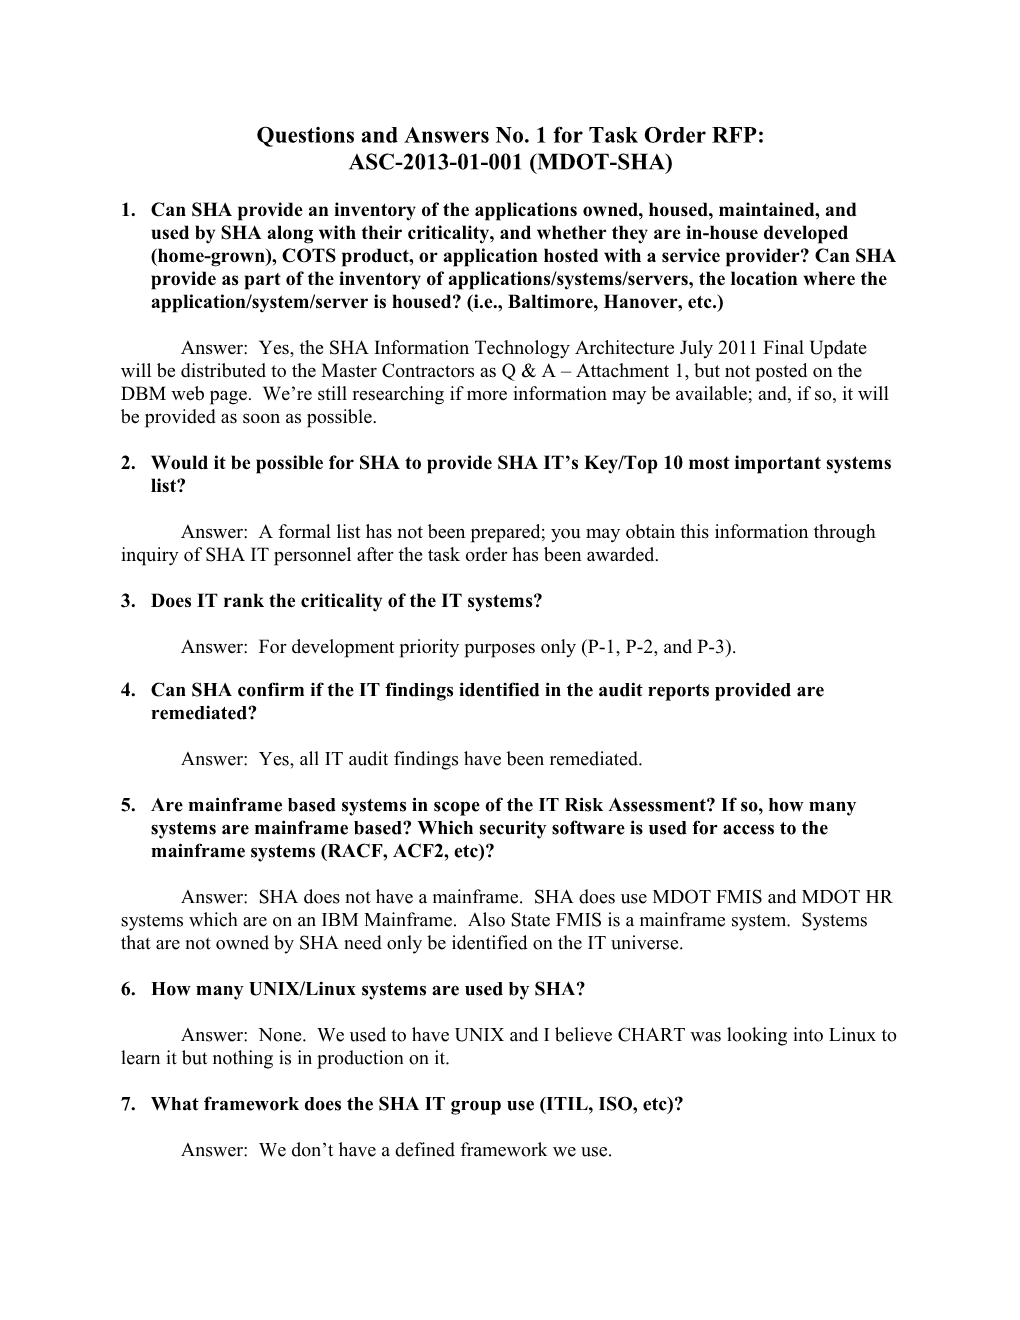 Questions and Answers No. 1 for Task Order RFP